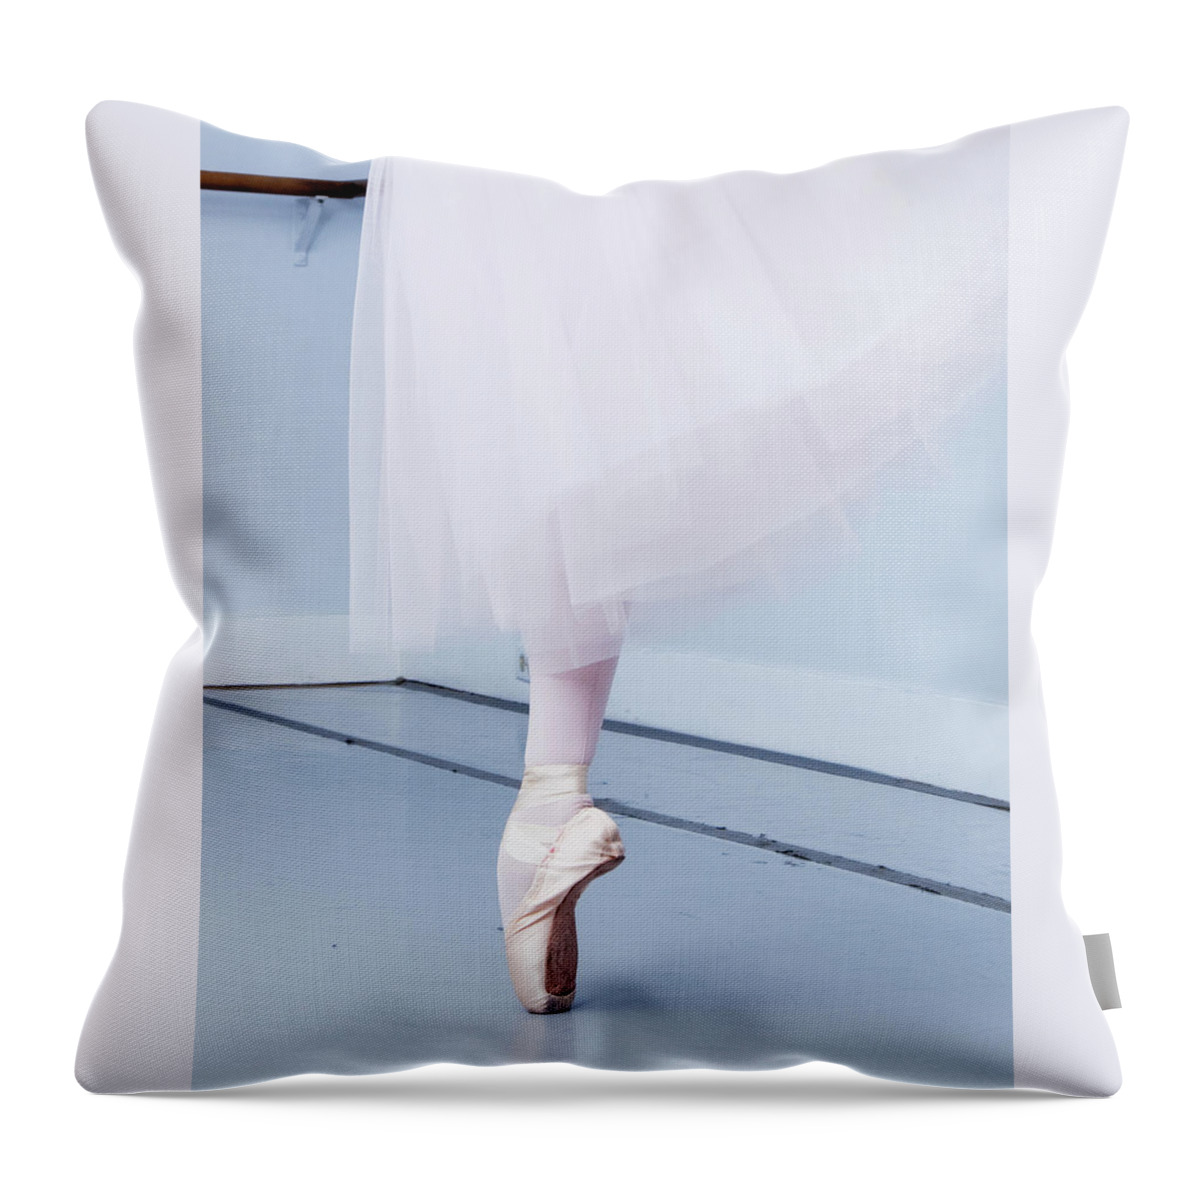 Expertise Throw Pillow featuring the photograph Ballerina On Pointe Low Angle View by Jonya